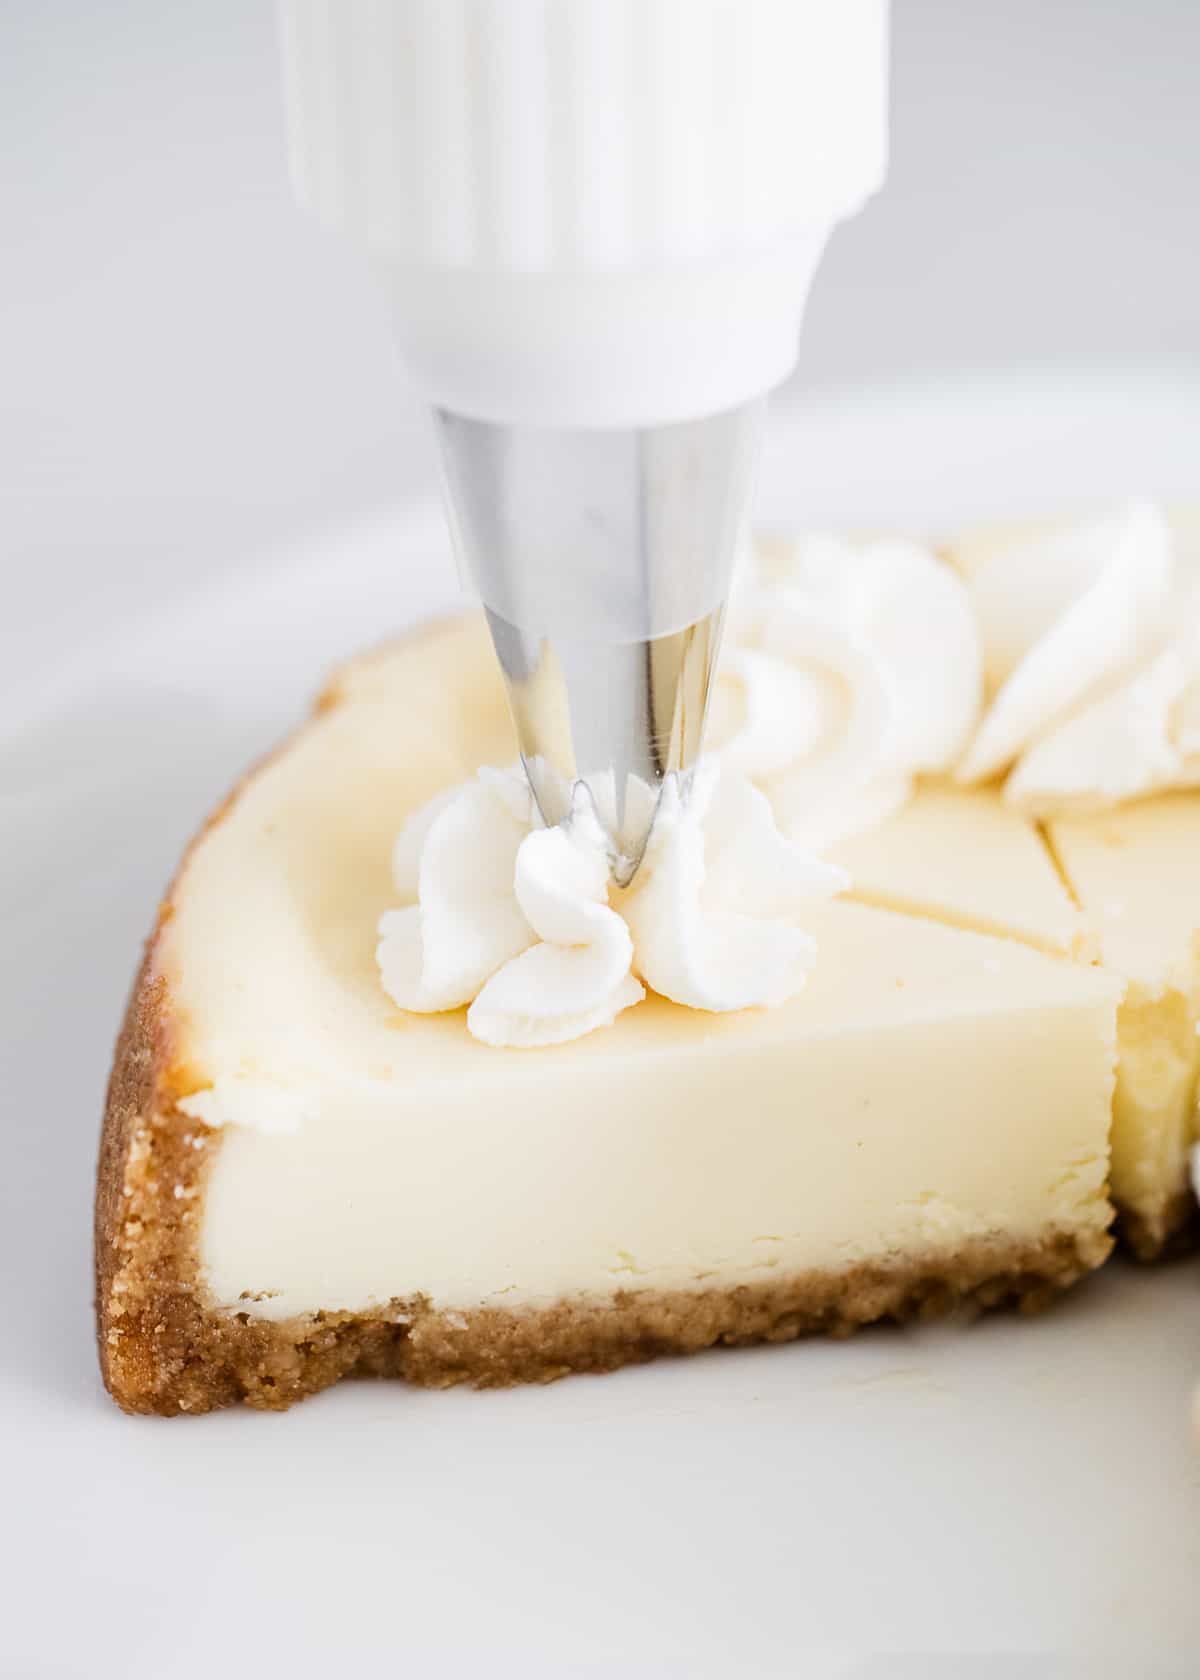 Piping whipped cream on cheesecake.